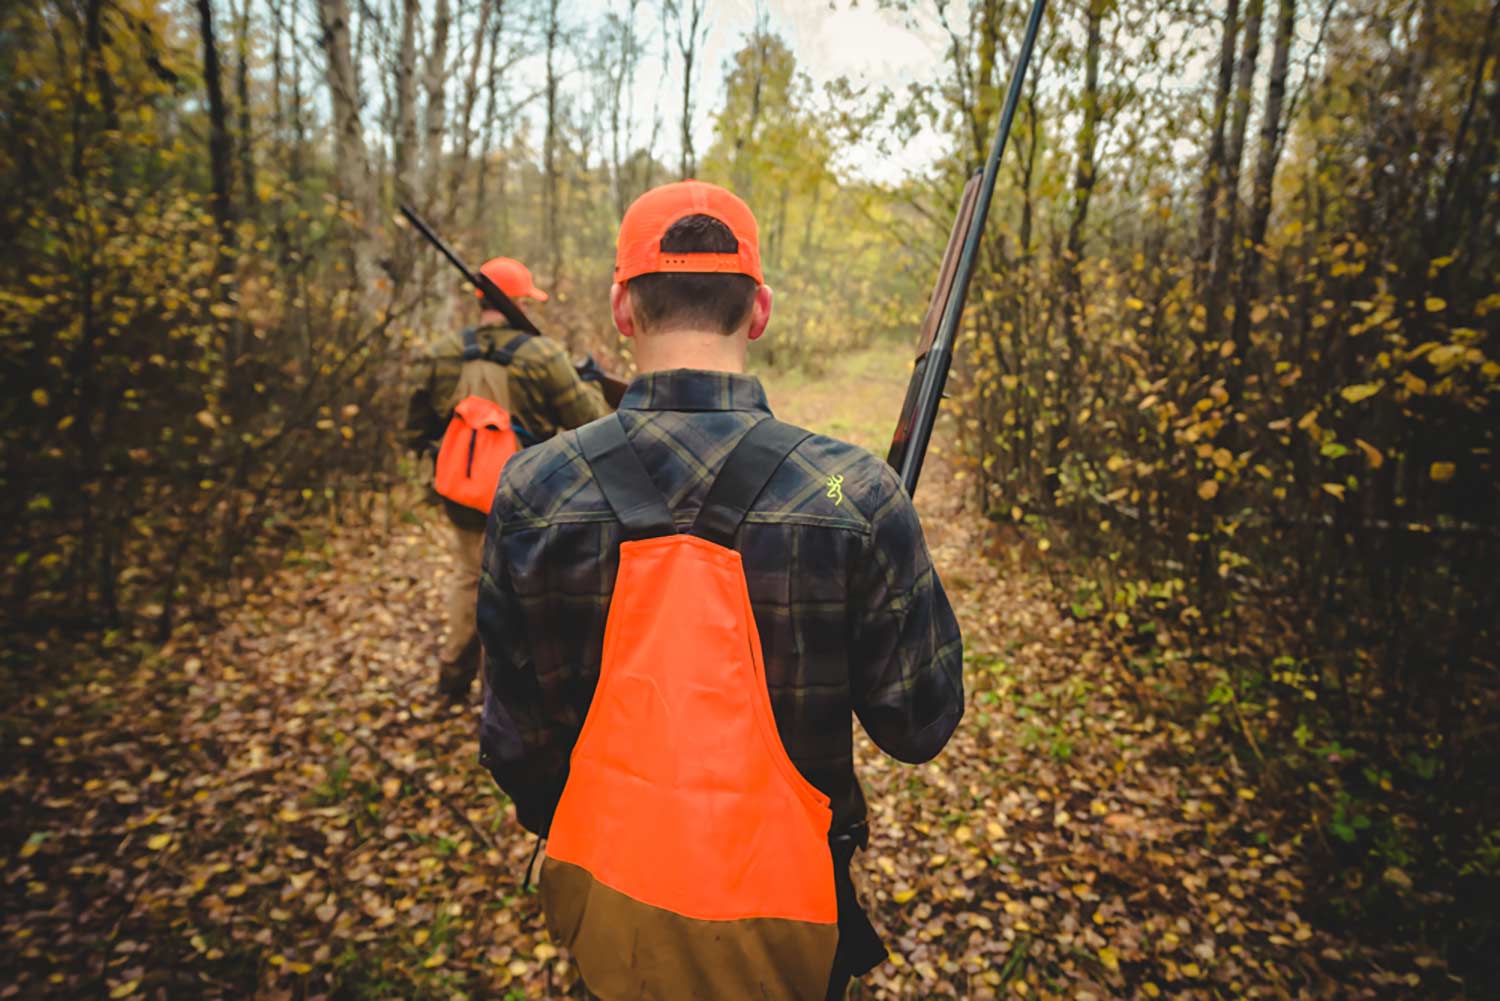 A hunter in orange walking through a trail in the woods.